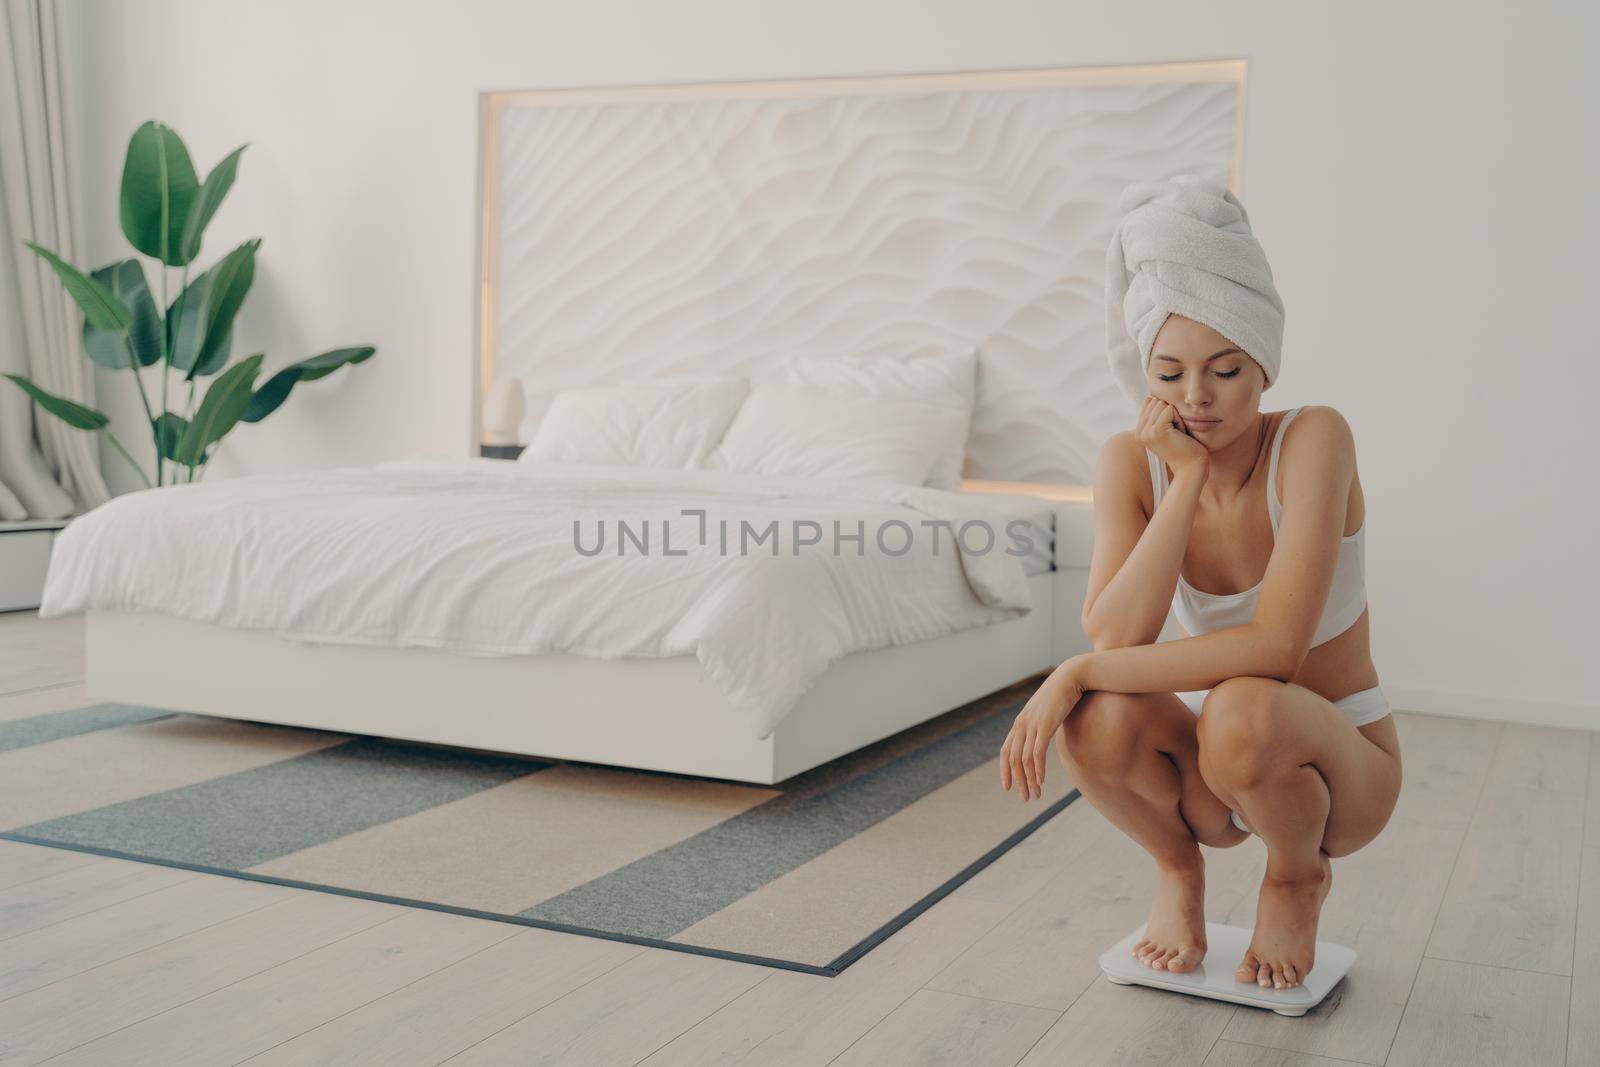 Dissatisfied young shapely woman crouched on scales in stylish light colored bedroom interior at home, wears white classic underwear and towel wrapped on head, daily measuring routine